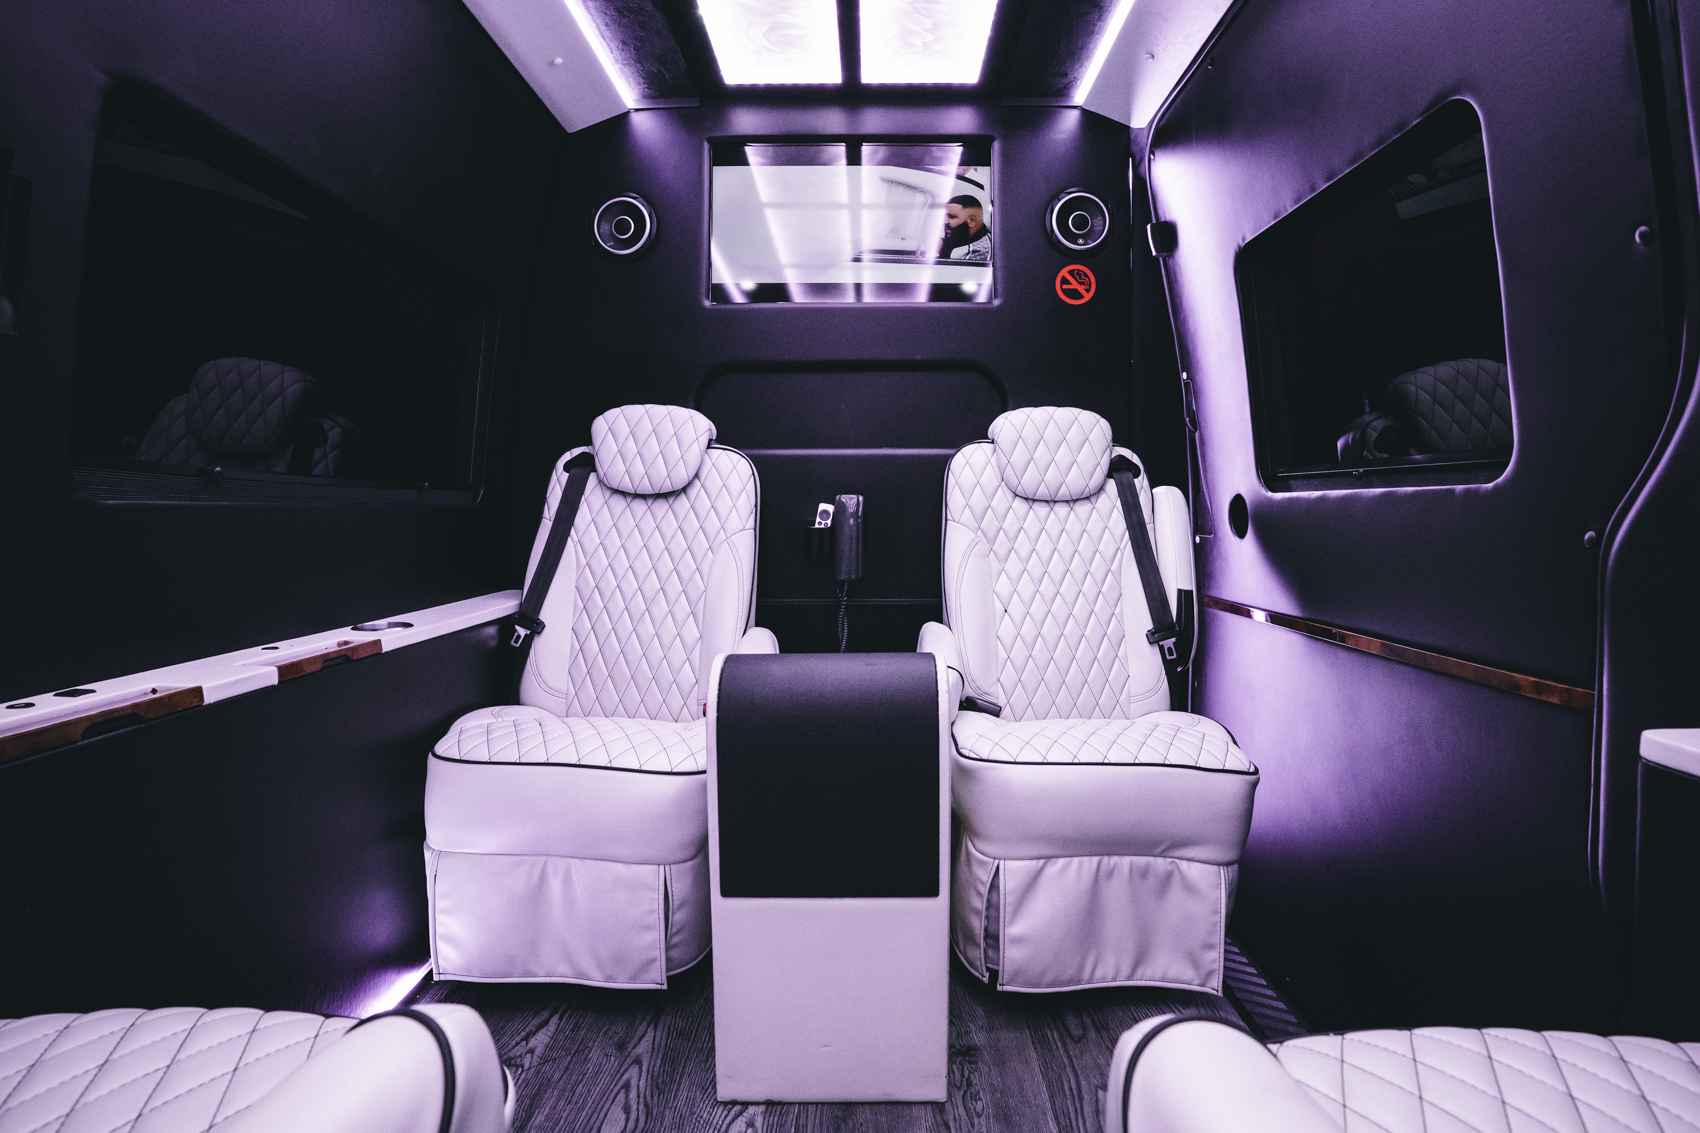 Luxury Chicago Limo Service